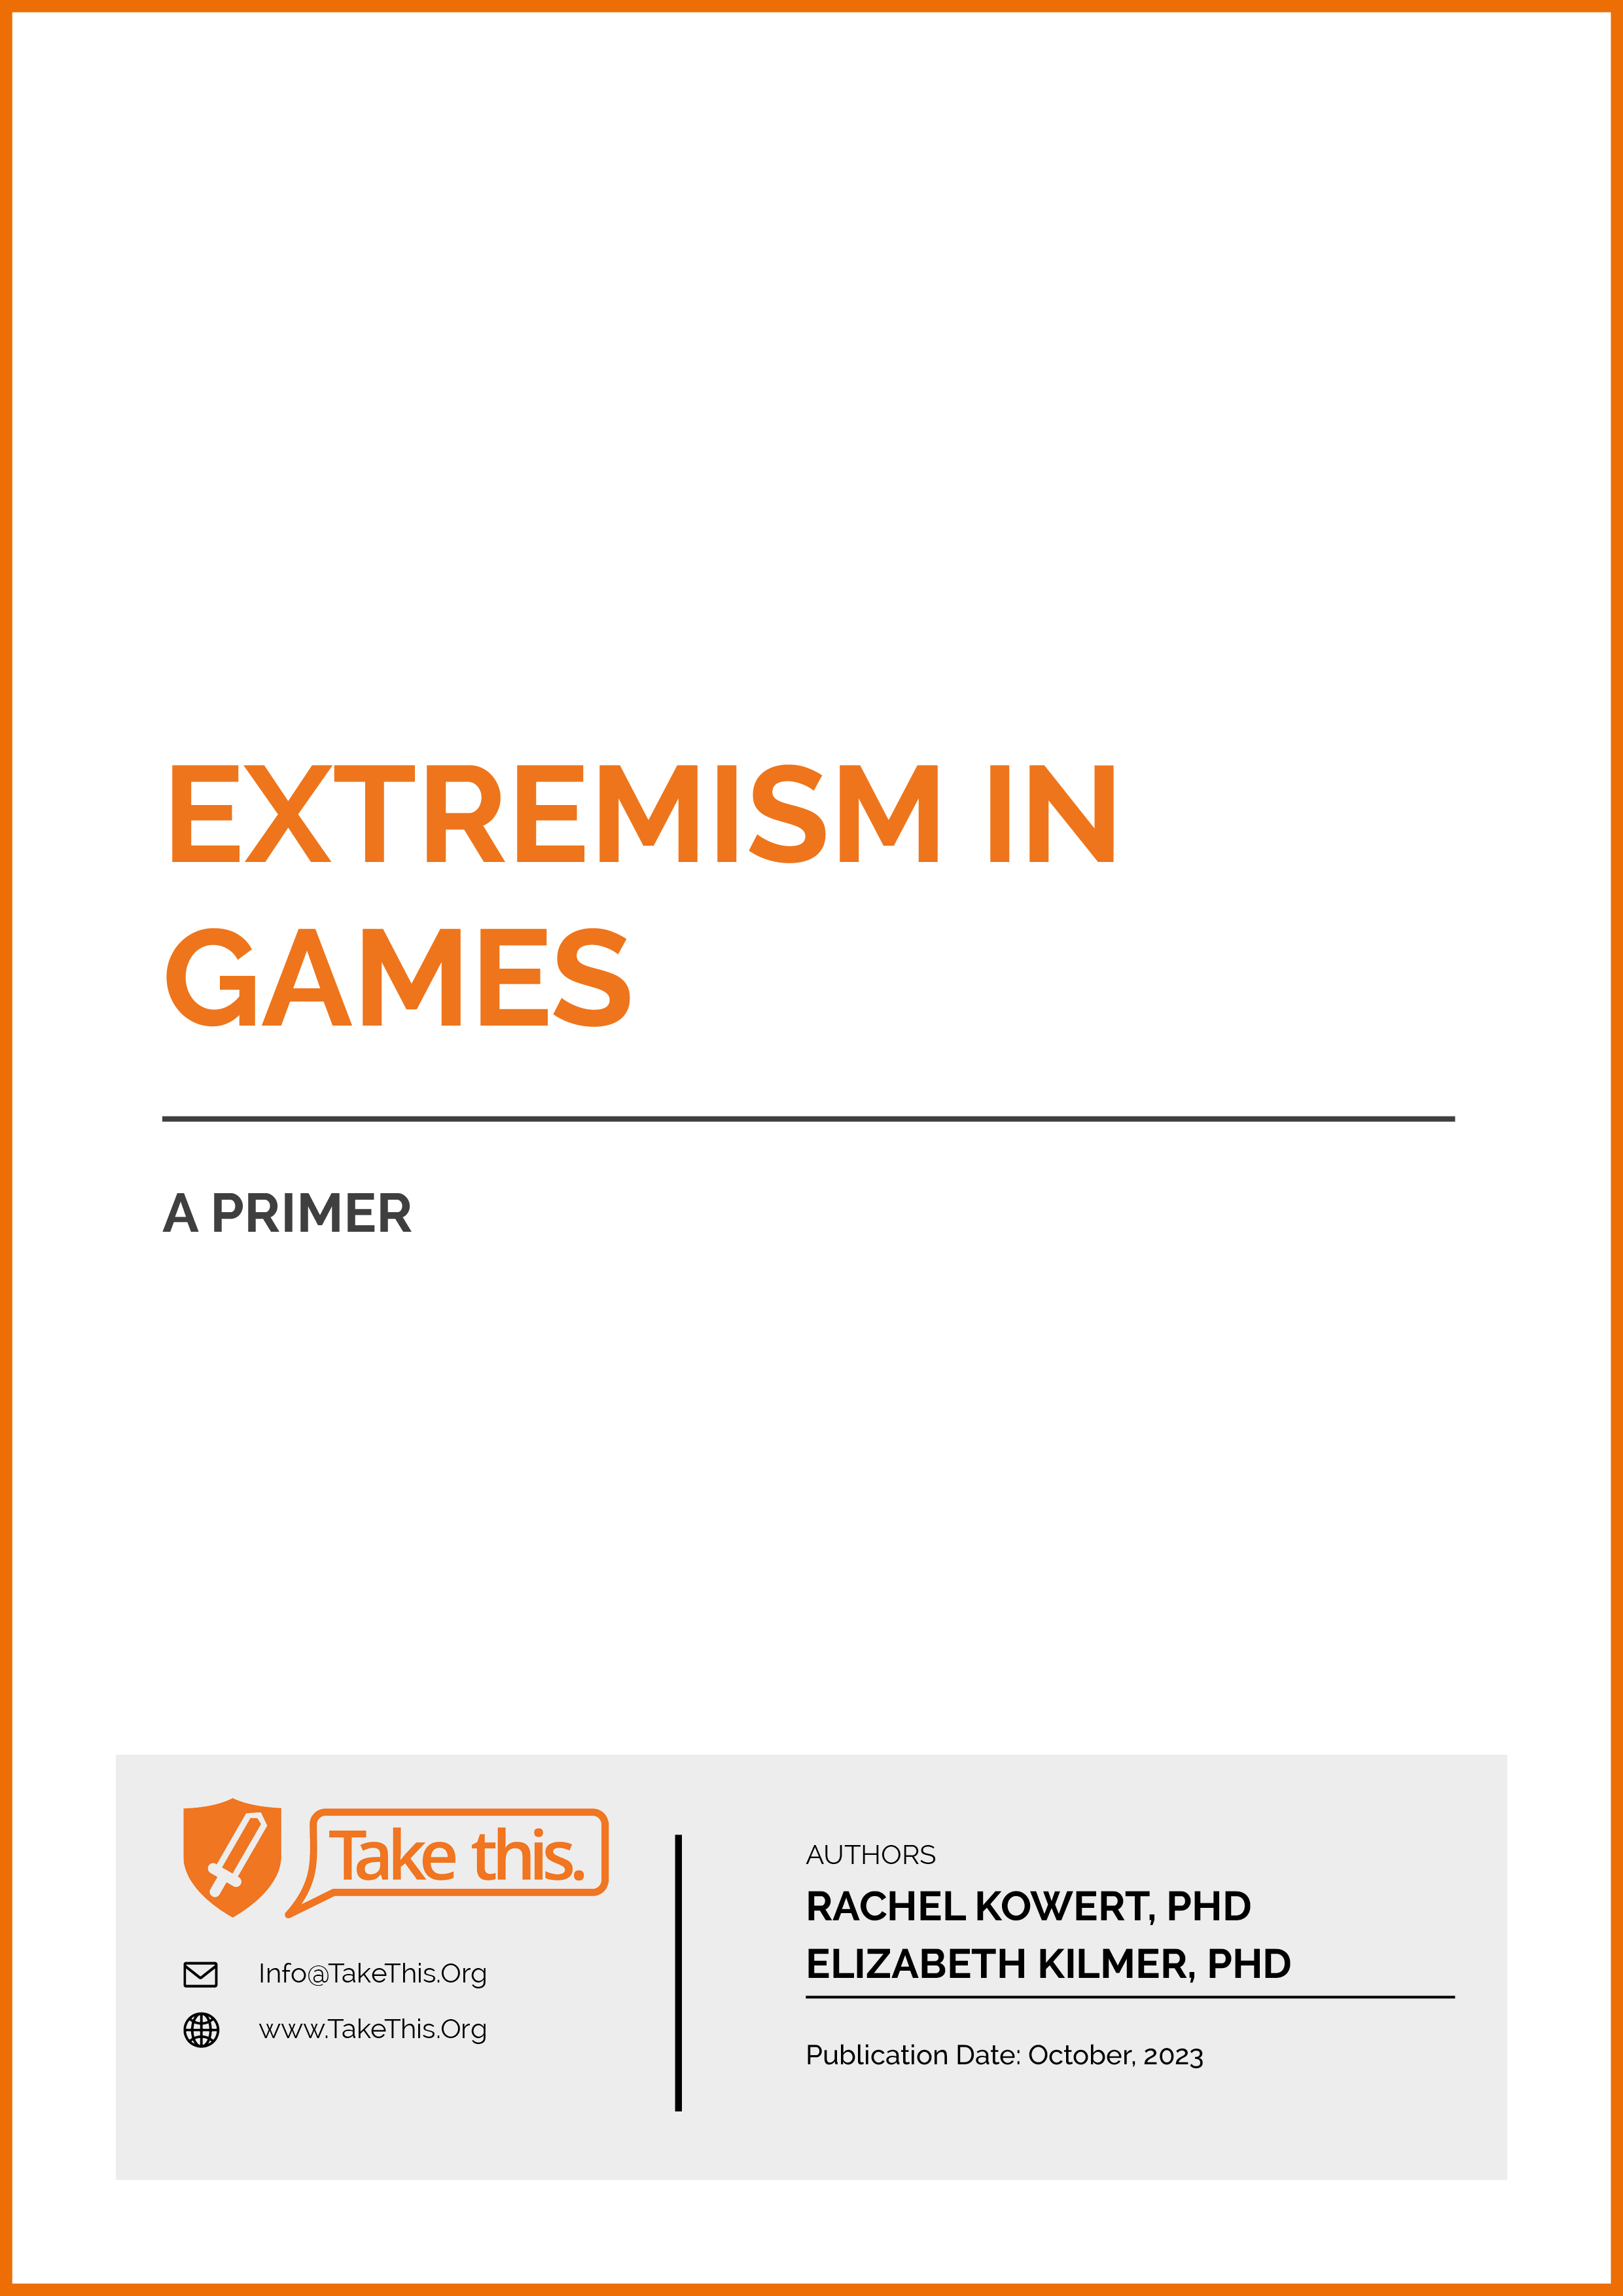 Extremism in Games: A Primer